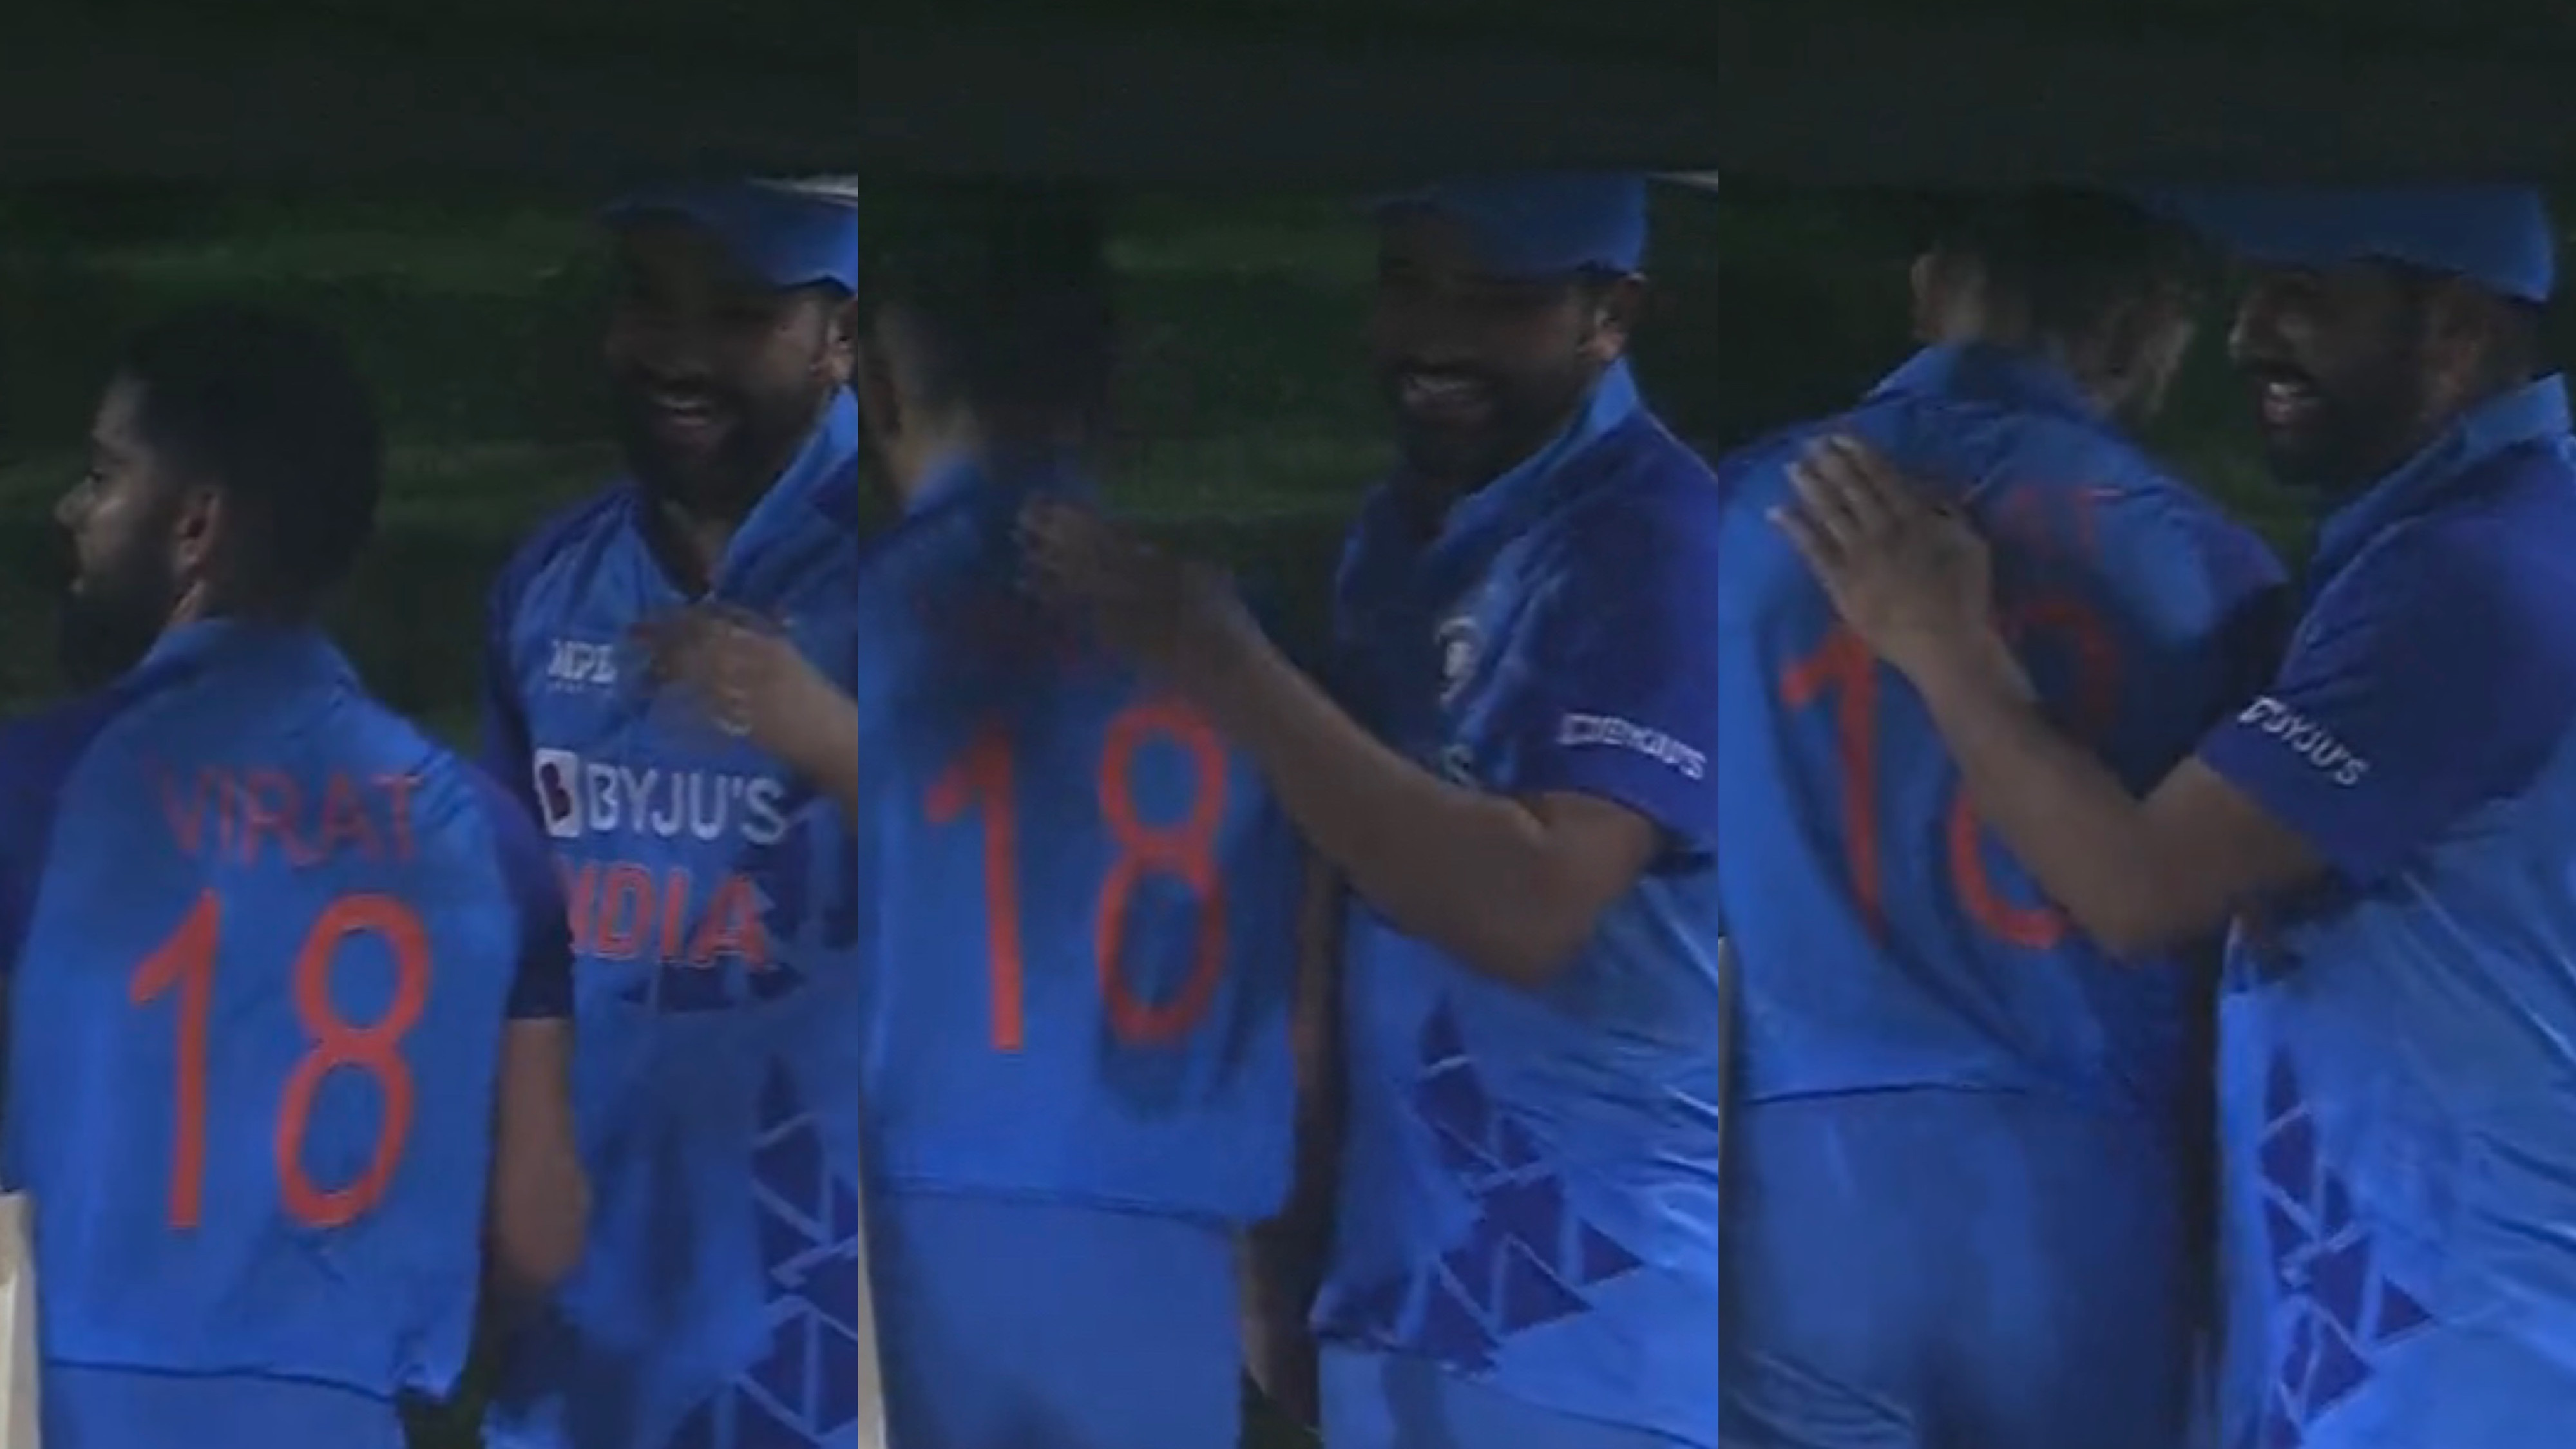 IND v AUS 2022: WATCH - Rohit Sharma pats Virat Kohli’s back after his match-winning 63 in 4th T20I